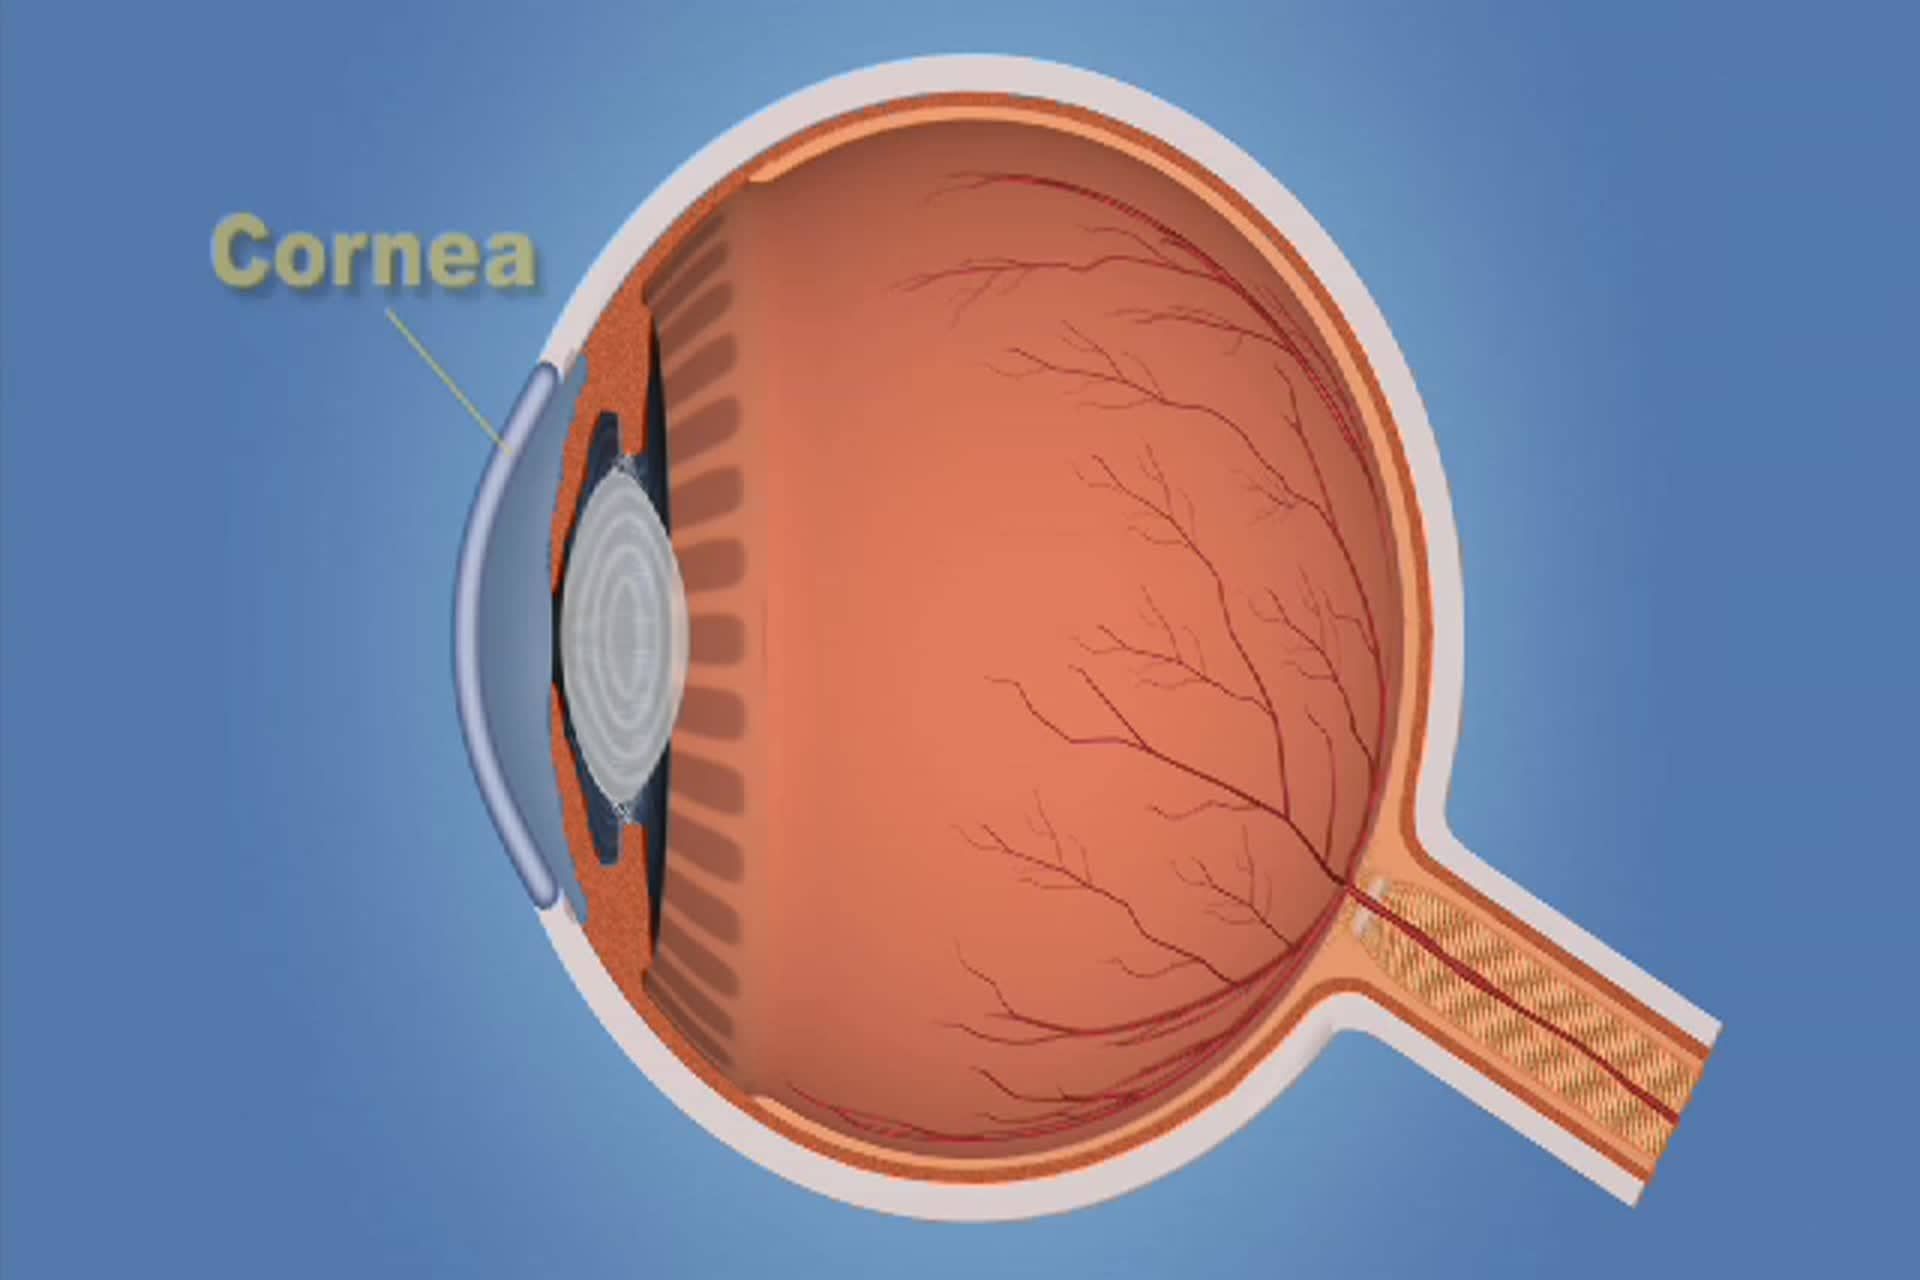 Glaucoma - How do my eyes see?